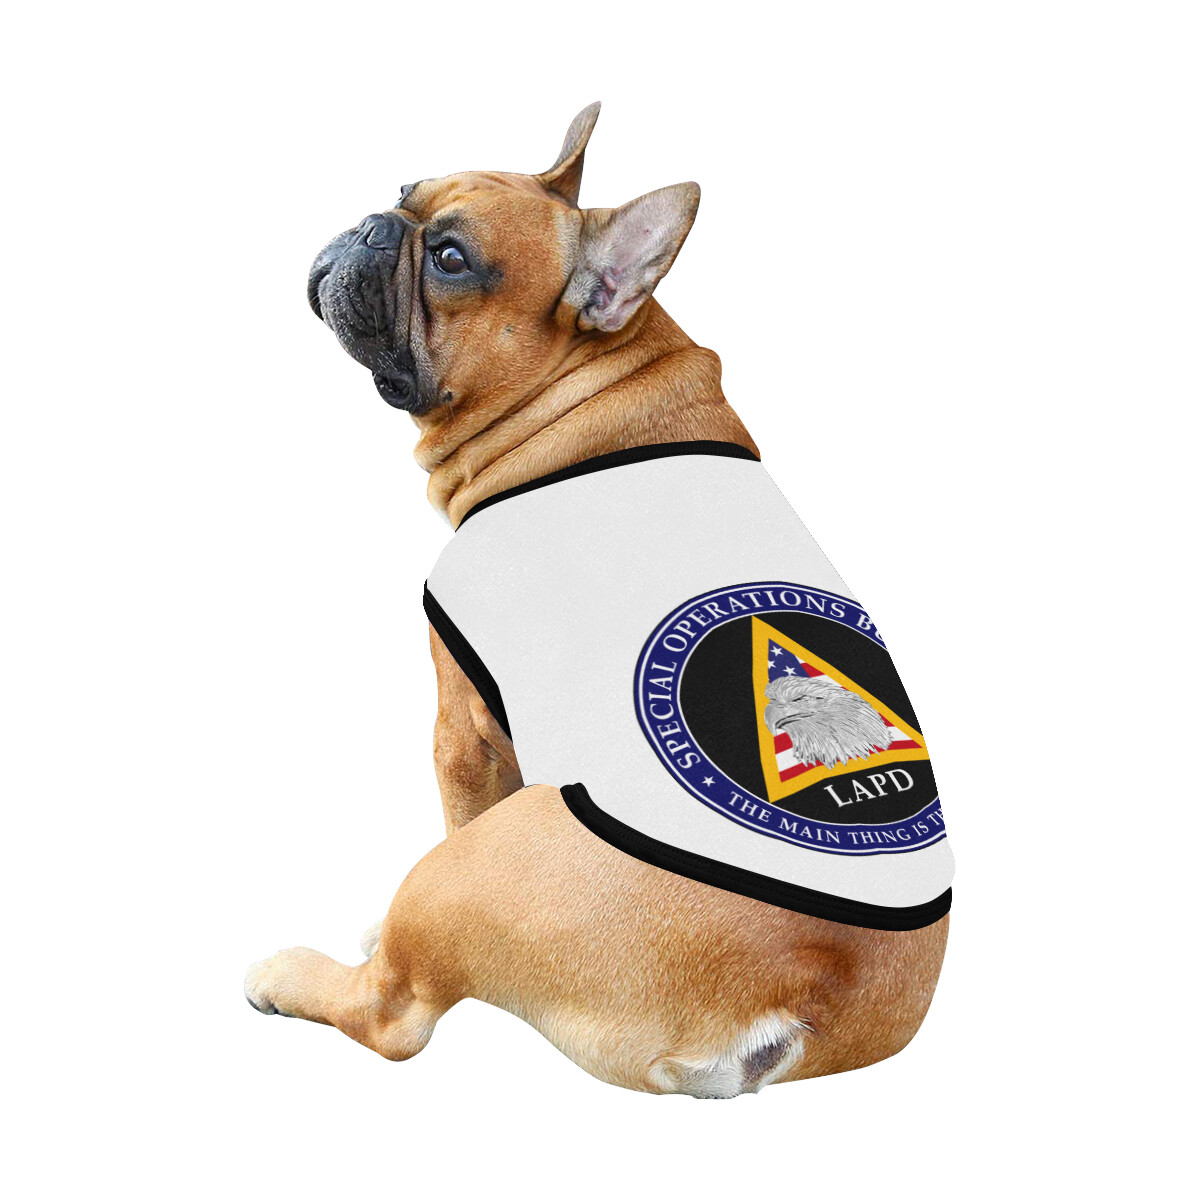 🐕 Special Operations LAPD Los Angeles Police Department Dog shirt, Dog Tank Top, Dog t-shirt, Dog clothes, Gifts, front back print, 7 sizes XS to 3XL, dog gifts, white